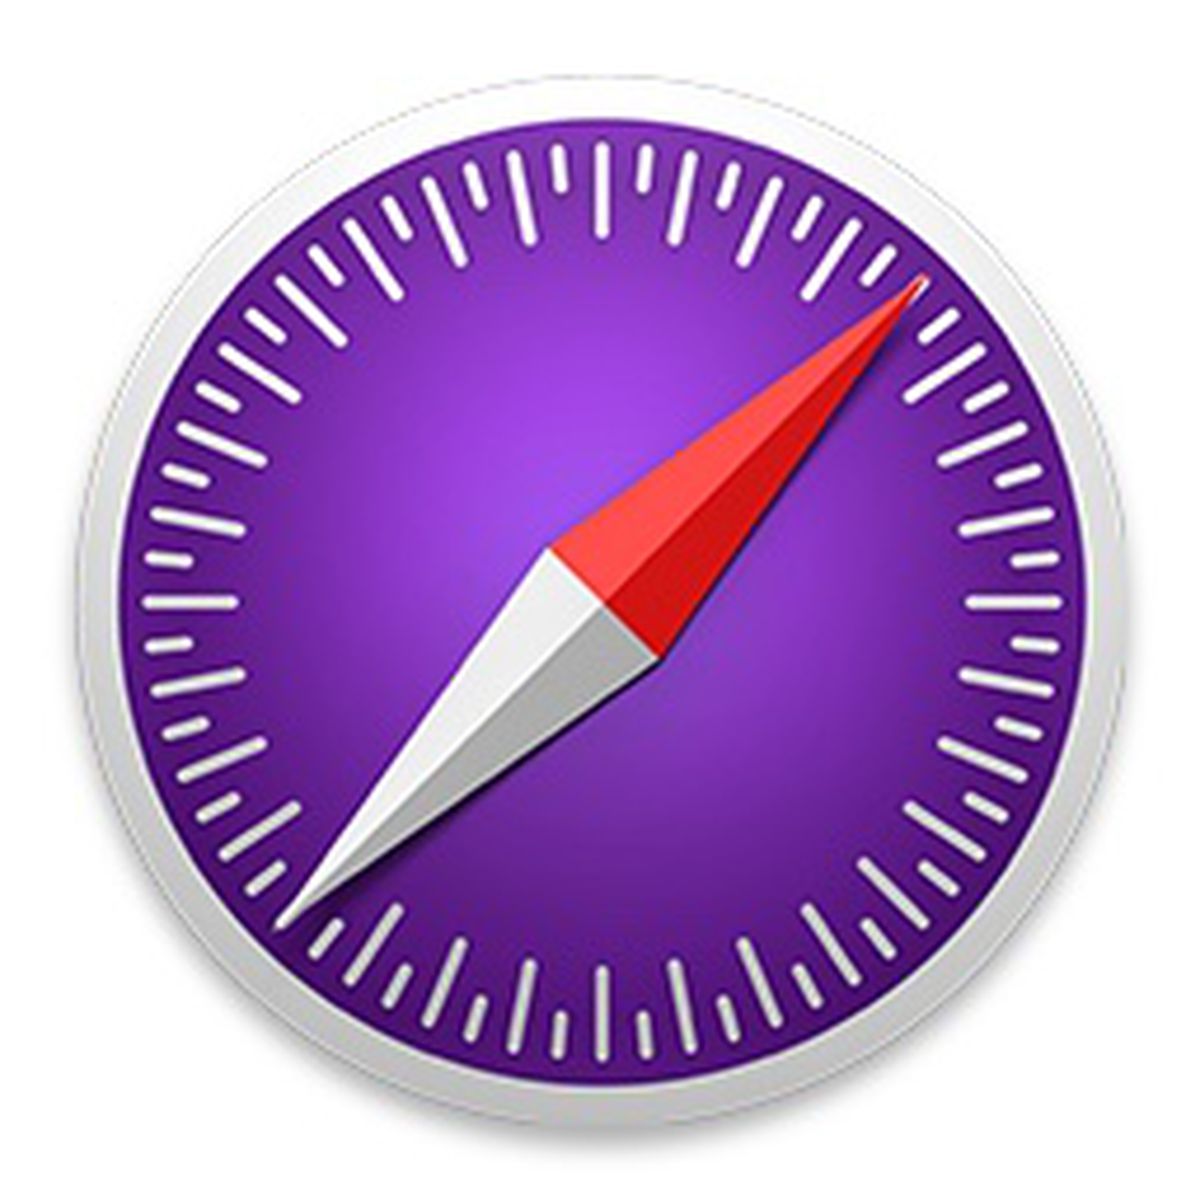 Apple Releases Safari Technology Preview 114 With Bug Fixes And Performance Improvements Macrumors